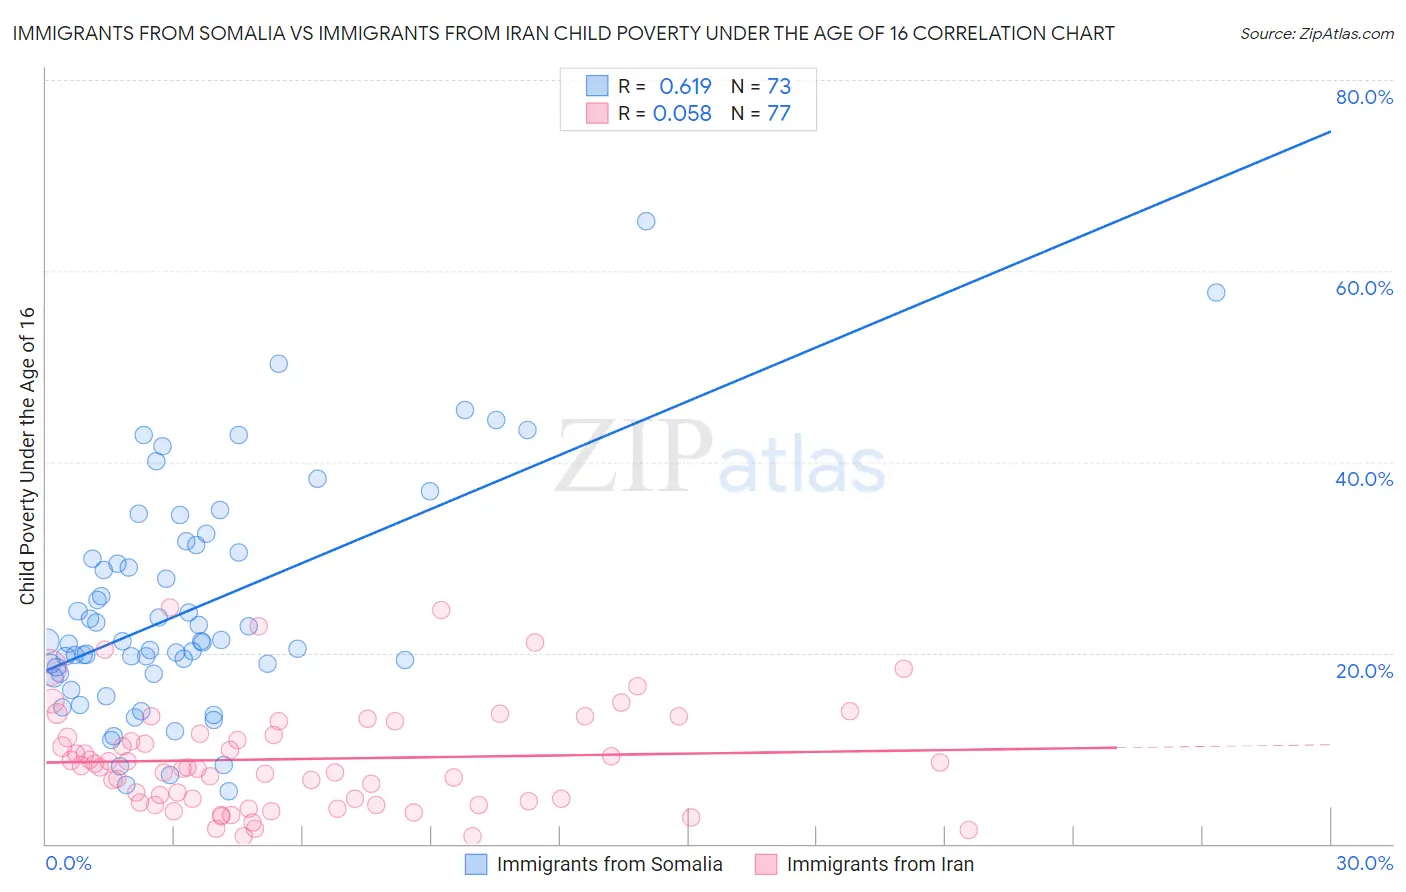 Immigrants from Somalia vs Immigrants from Iran Child Poverty Under the Age of 16